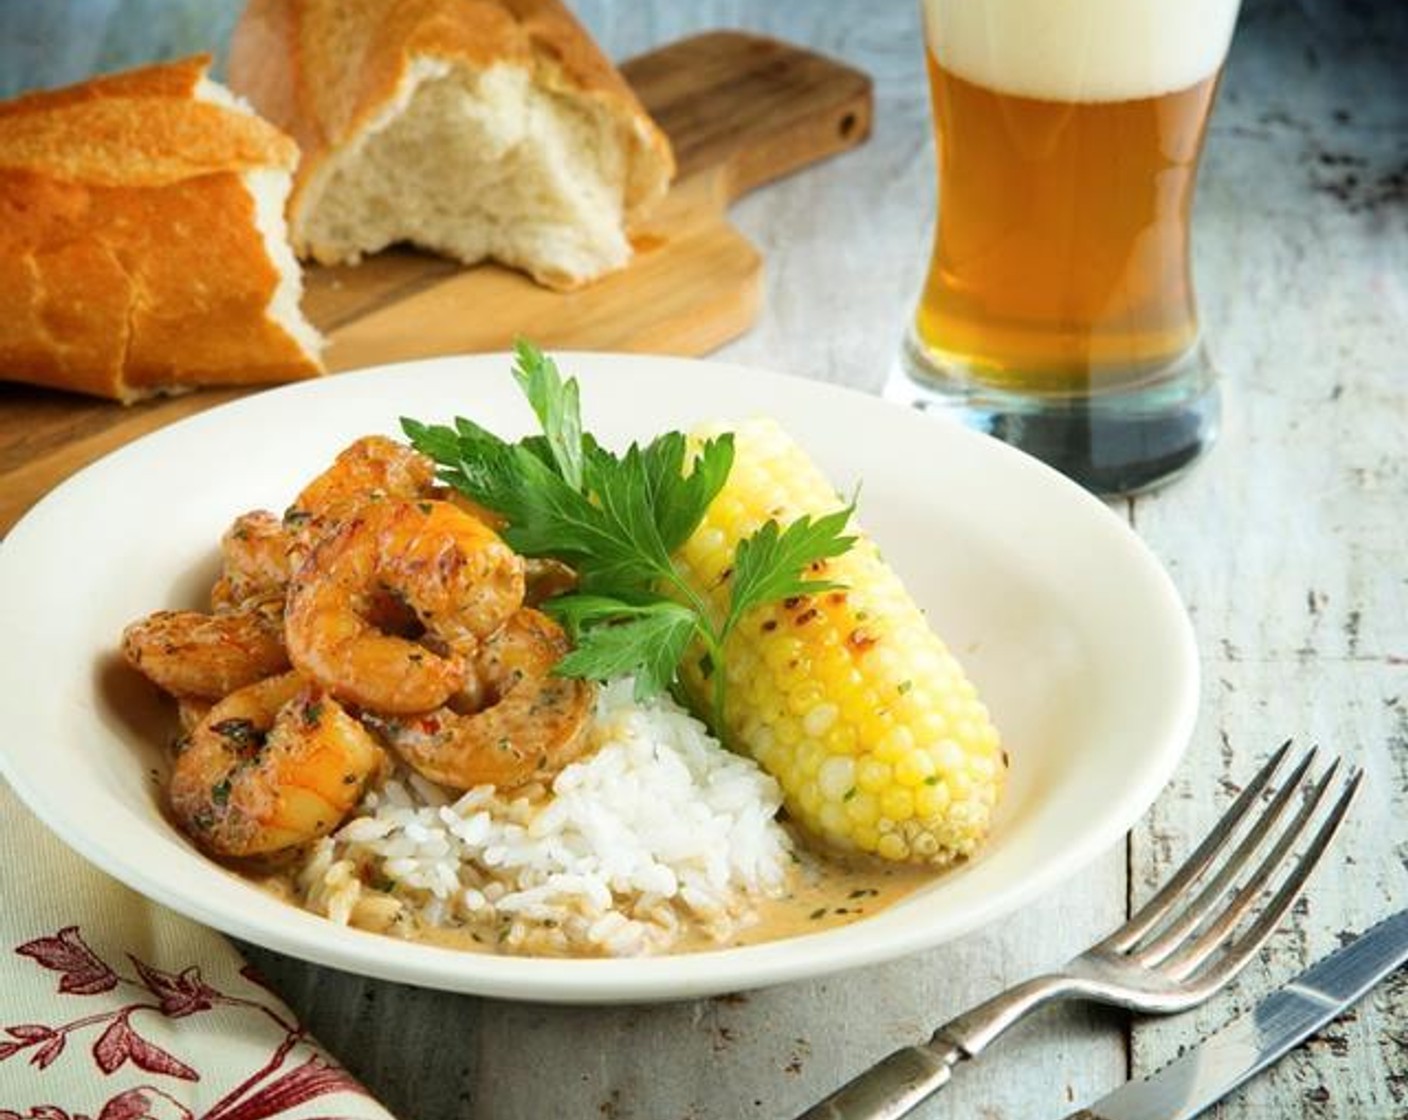 New Orleans "BBQ" Shrimp with Roasted Corn